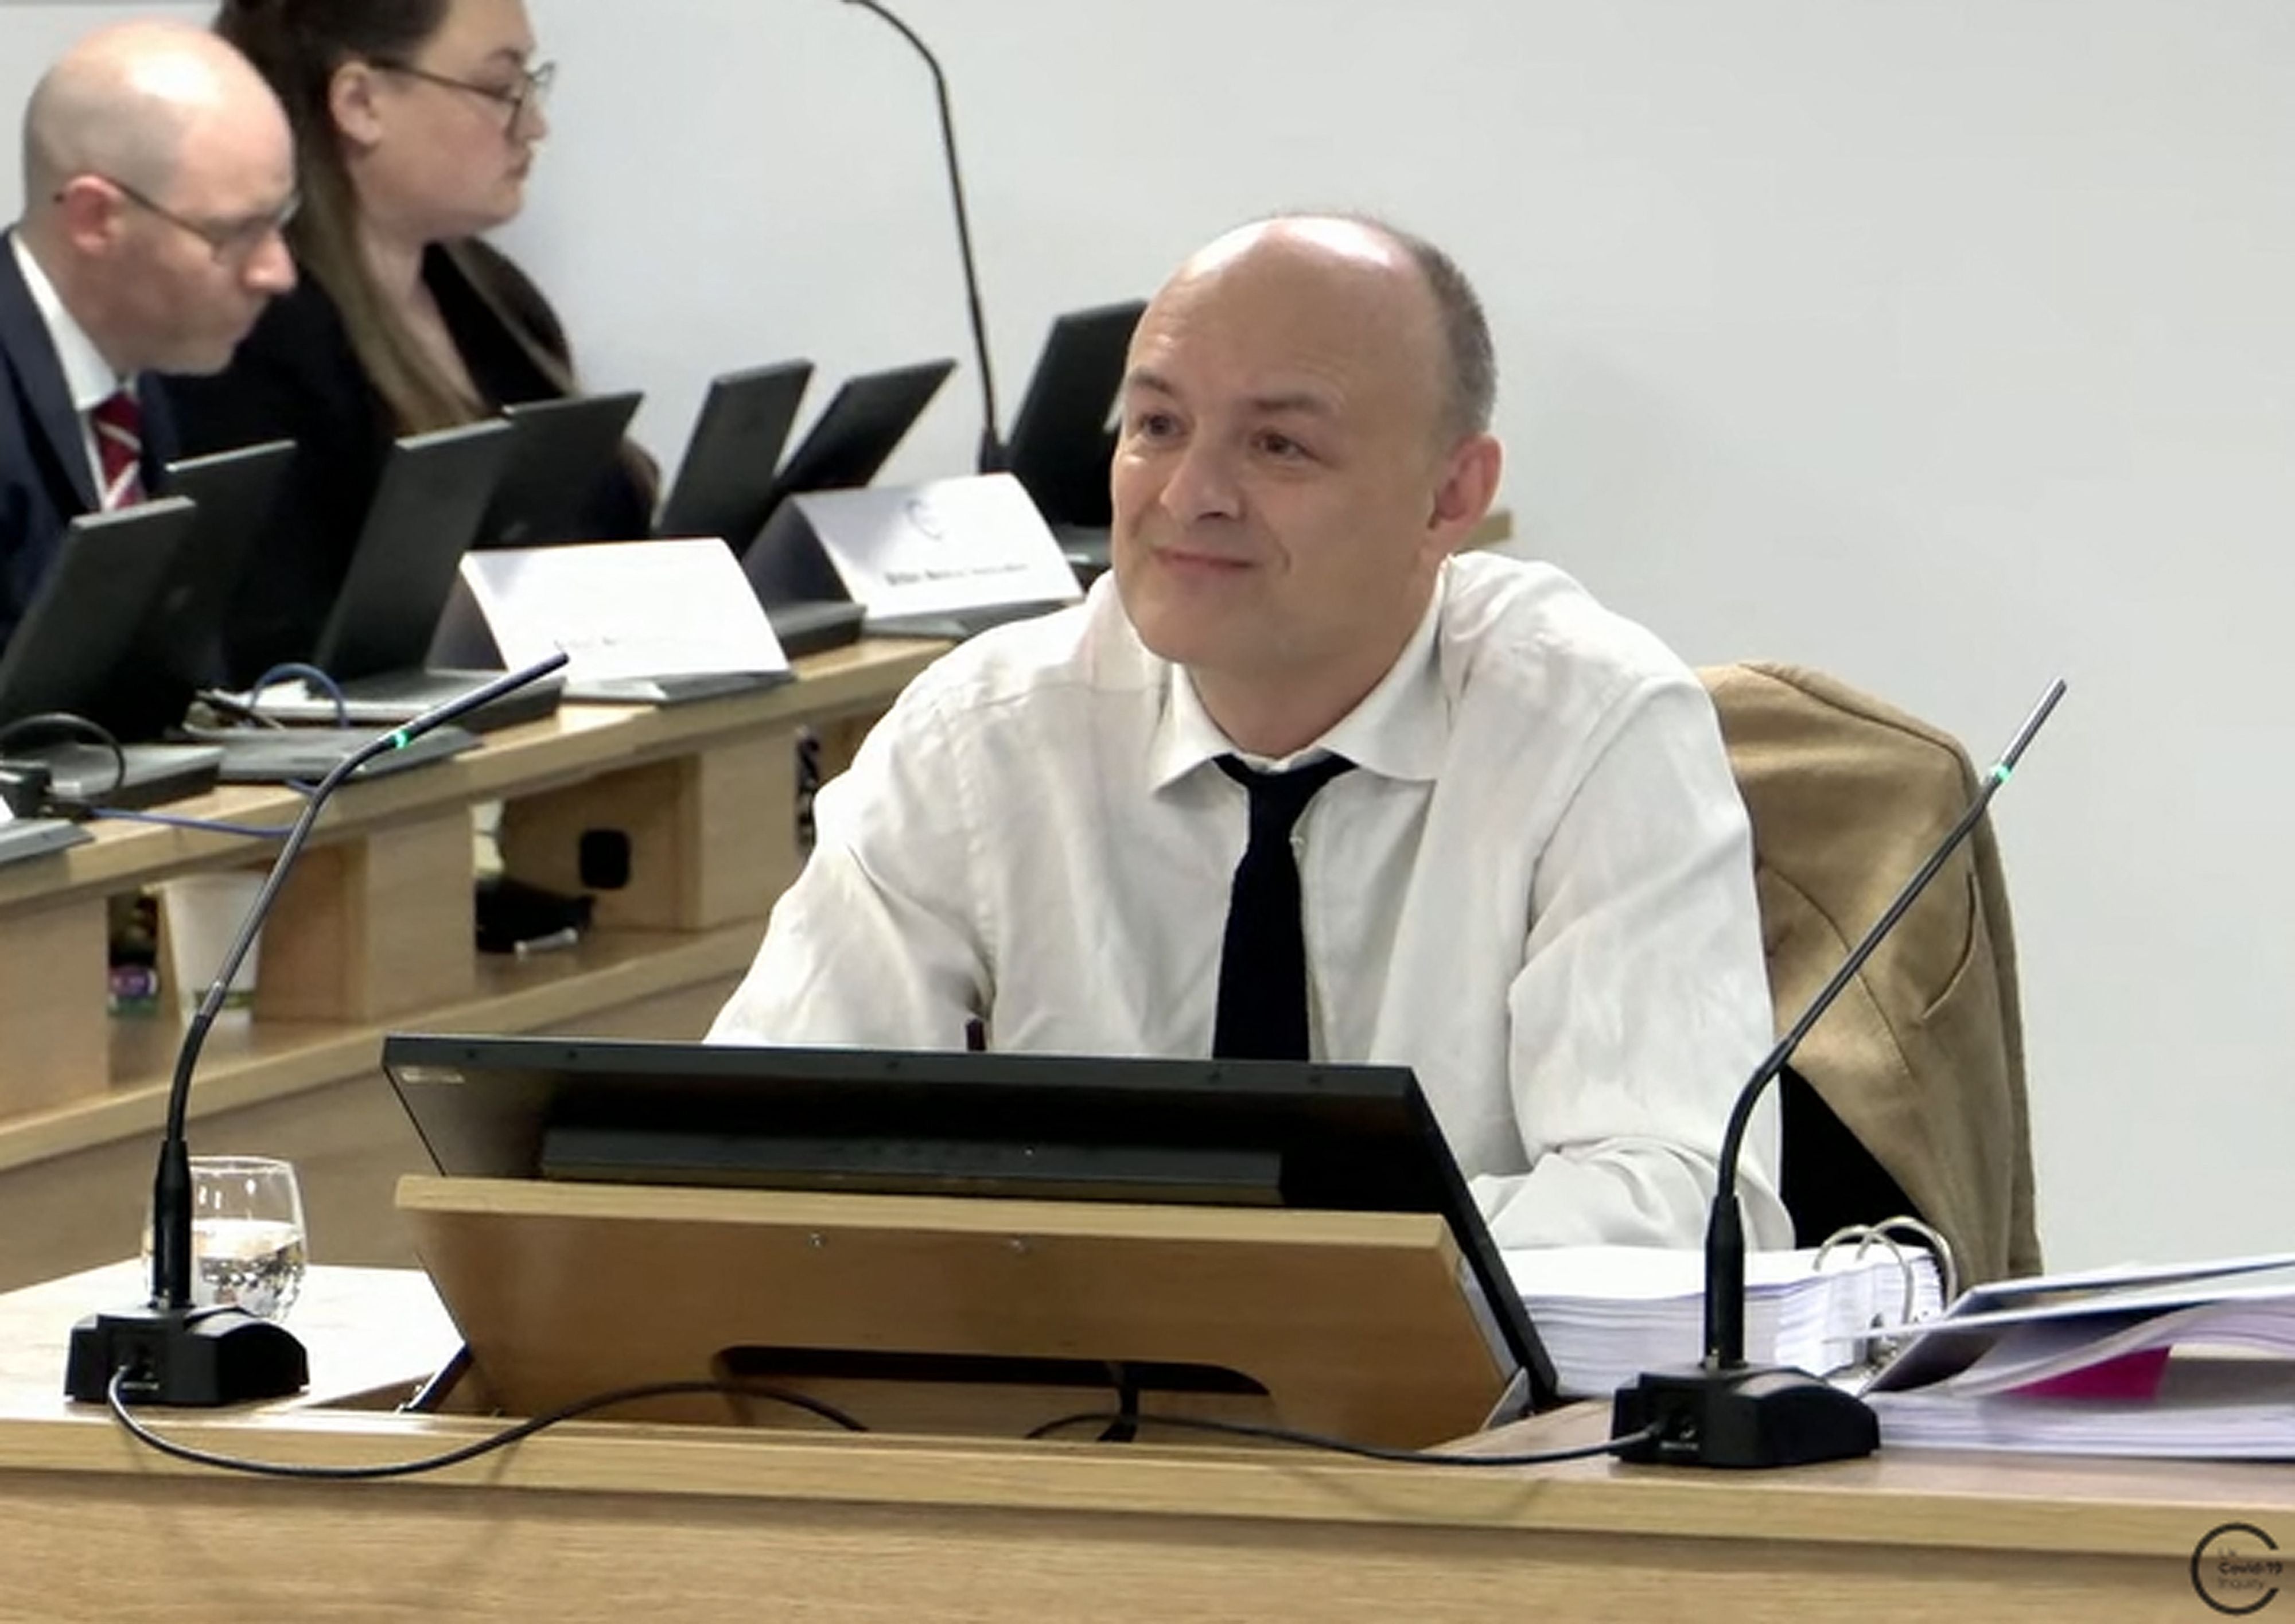 Dominic Cummings giving evidence during the Covid-19 inquiry